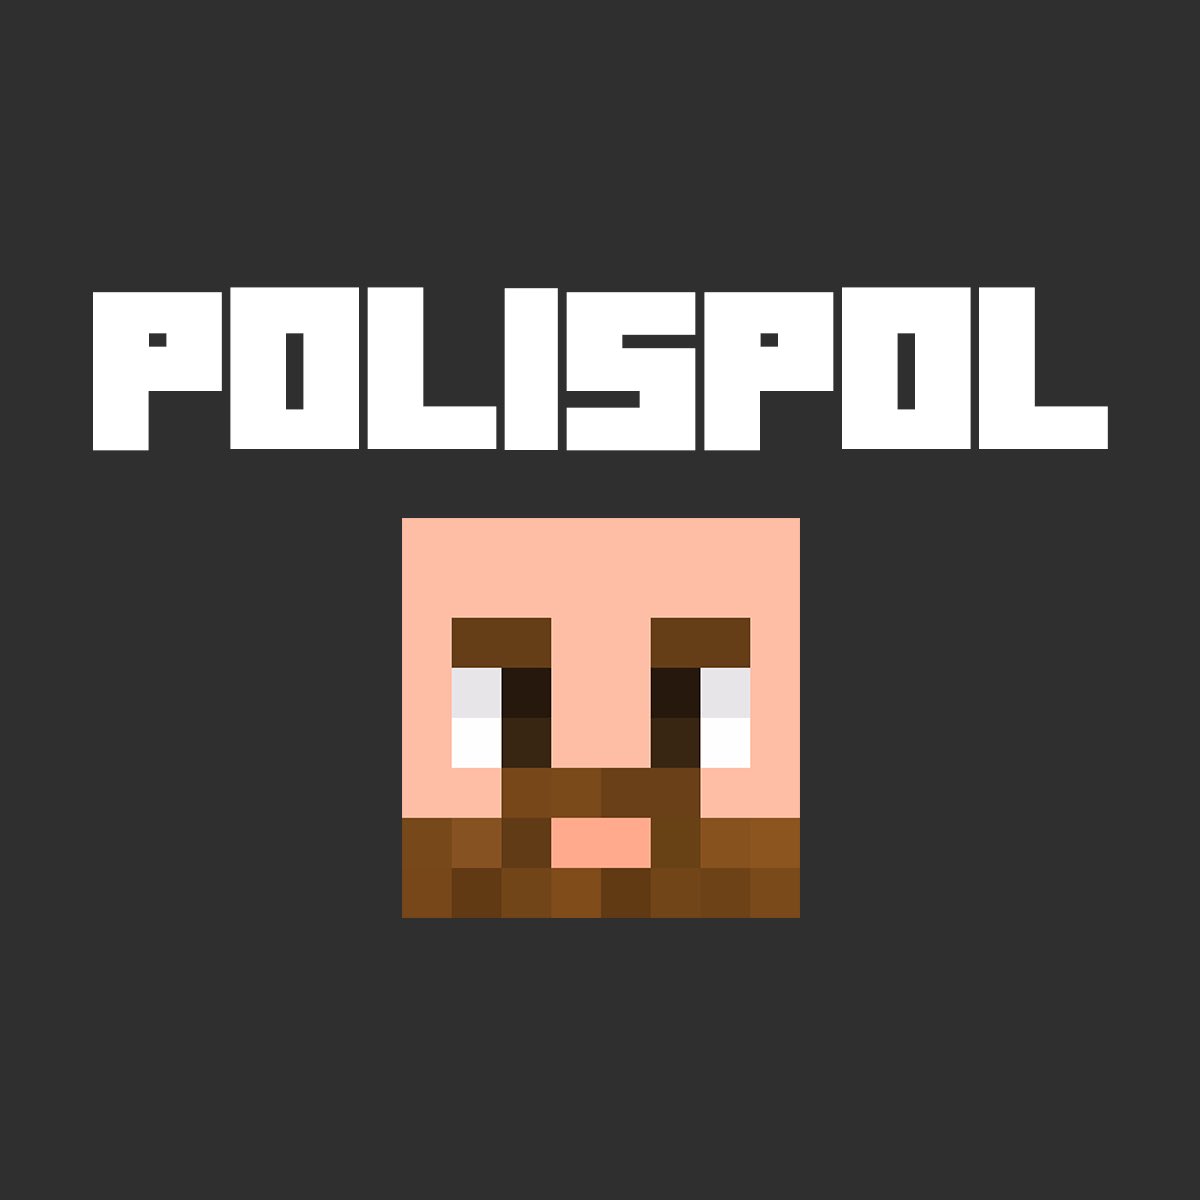 WELCOME TO THE QSMP @polispol 

Polispol, also known as Pol is a streamer, youtuber and cinematographer, he does advertising, film and TV shoots. He recently won the For Your Fest award on tiktok. He decided to open a Twitch channel in 2020 to reach a younger audience, giving…